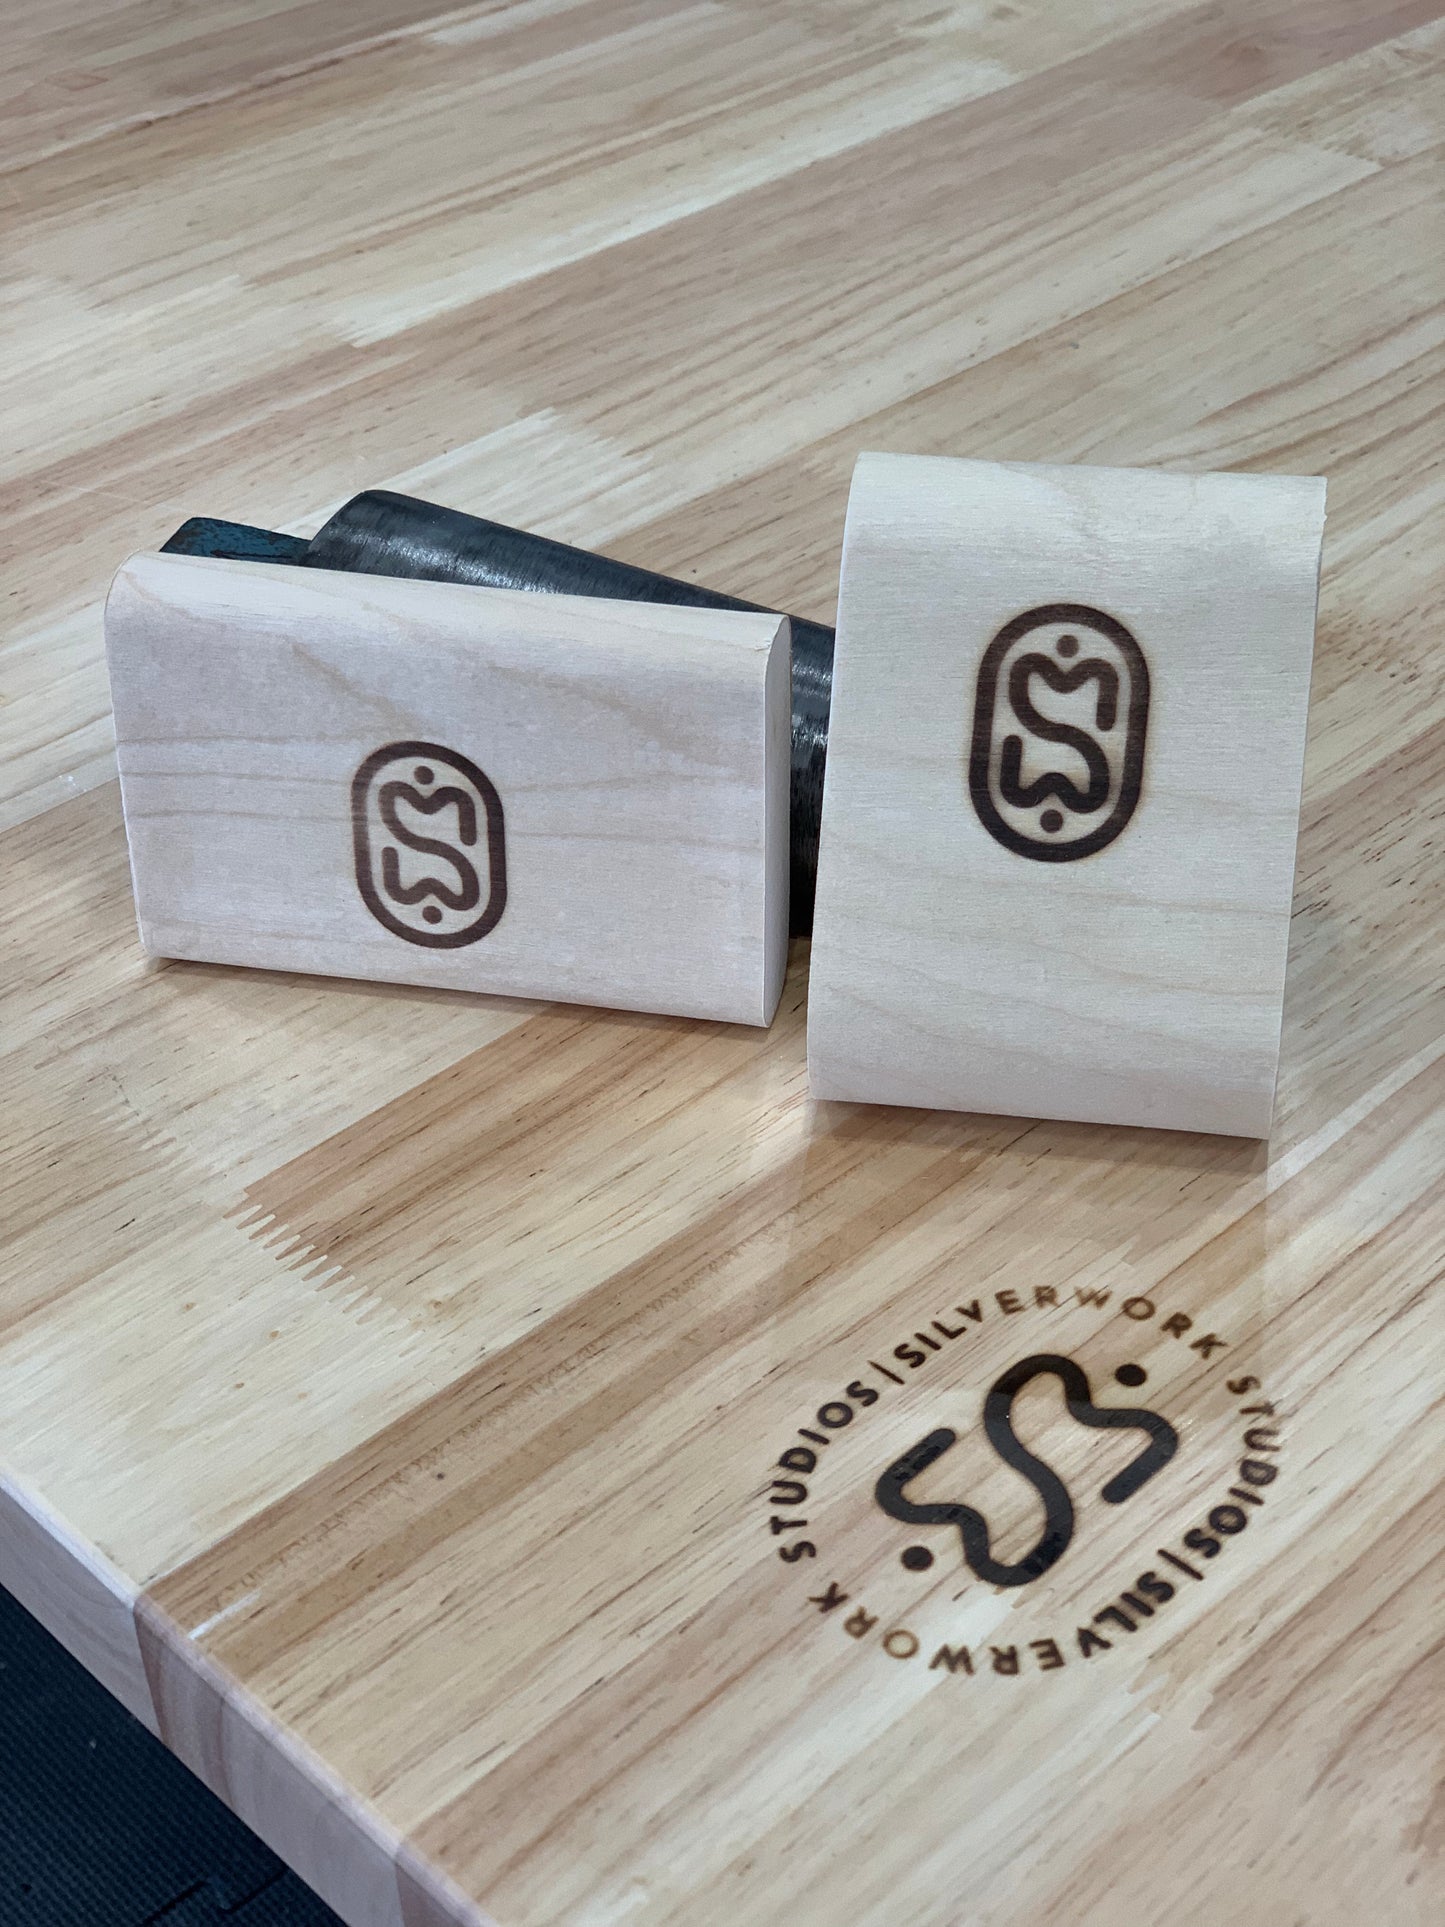 Branded gift boxes